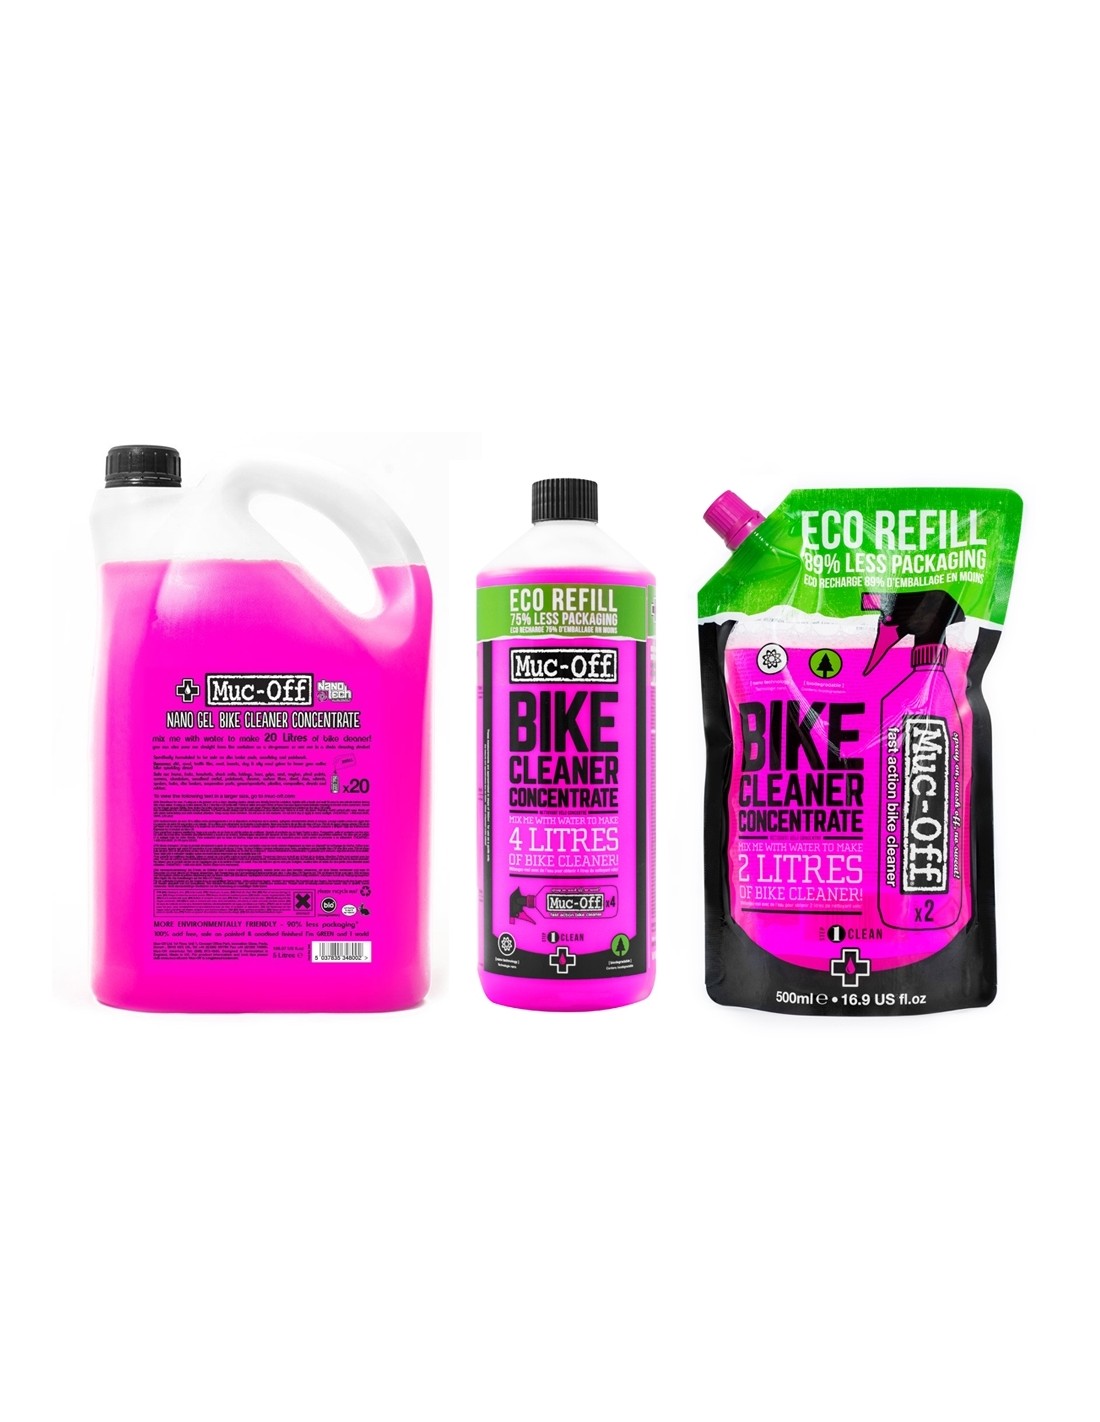 nettoyant velo concentre bike cleaner 1l CYCLES CESBRON